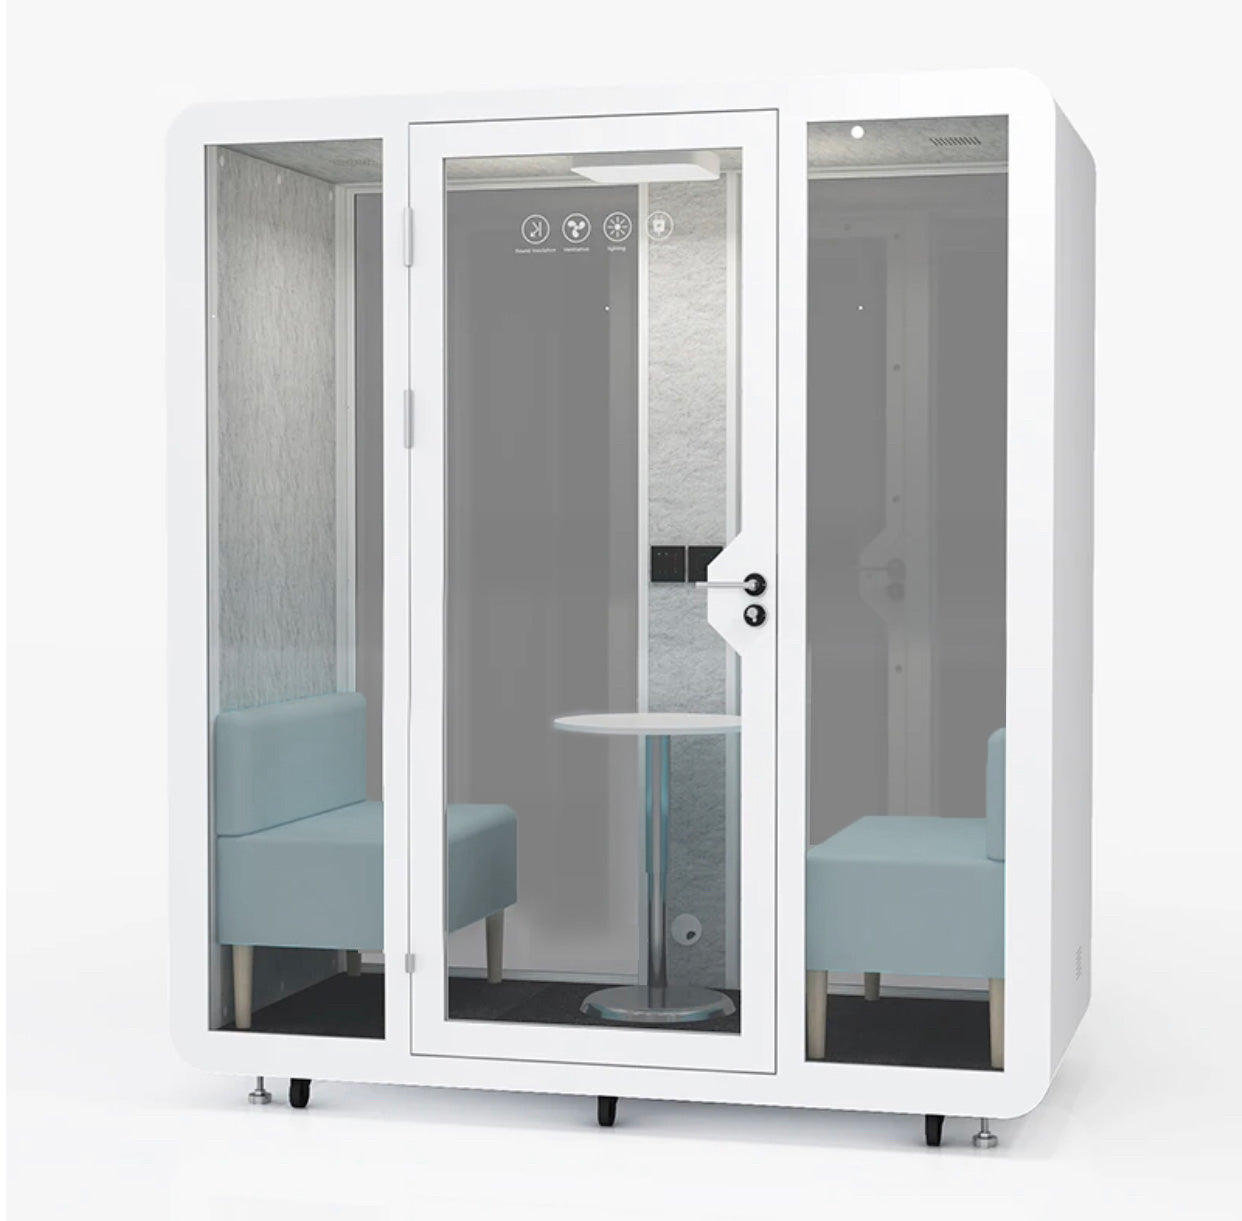 eBooth Duo office pod privacy booth